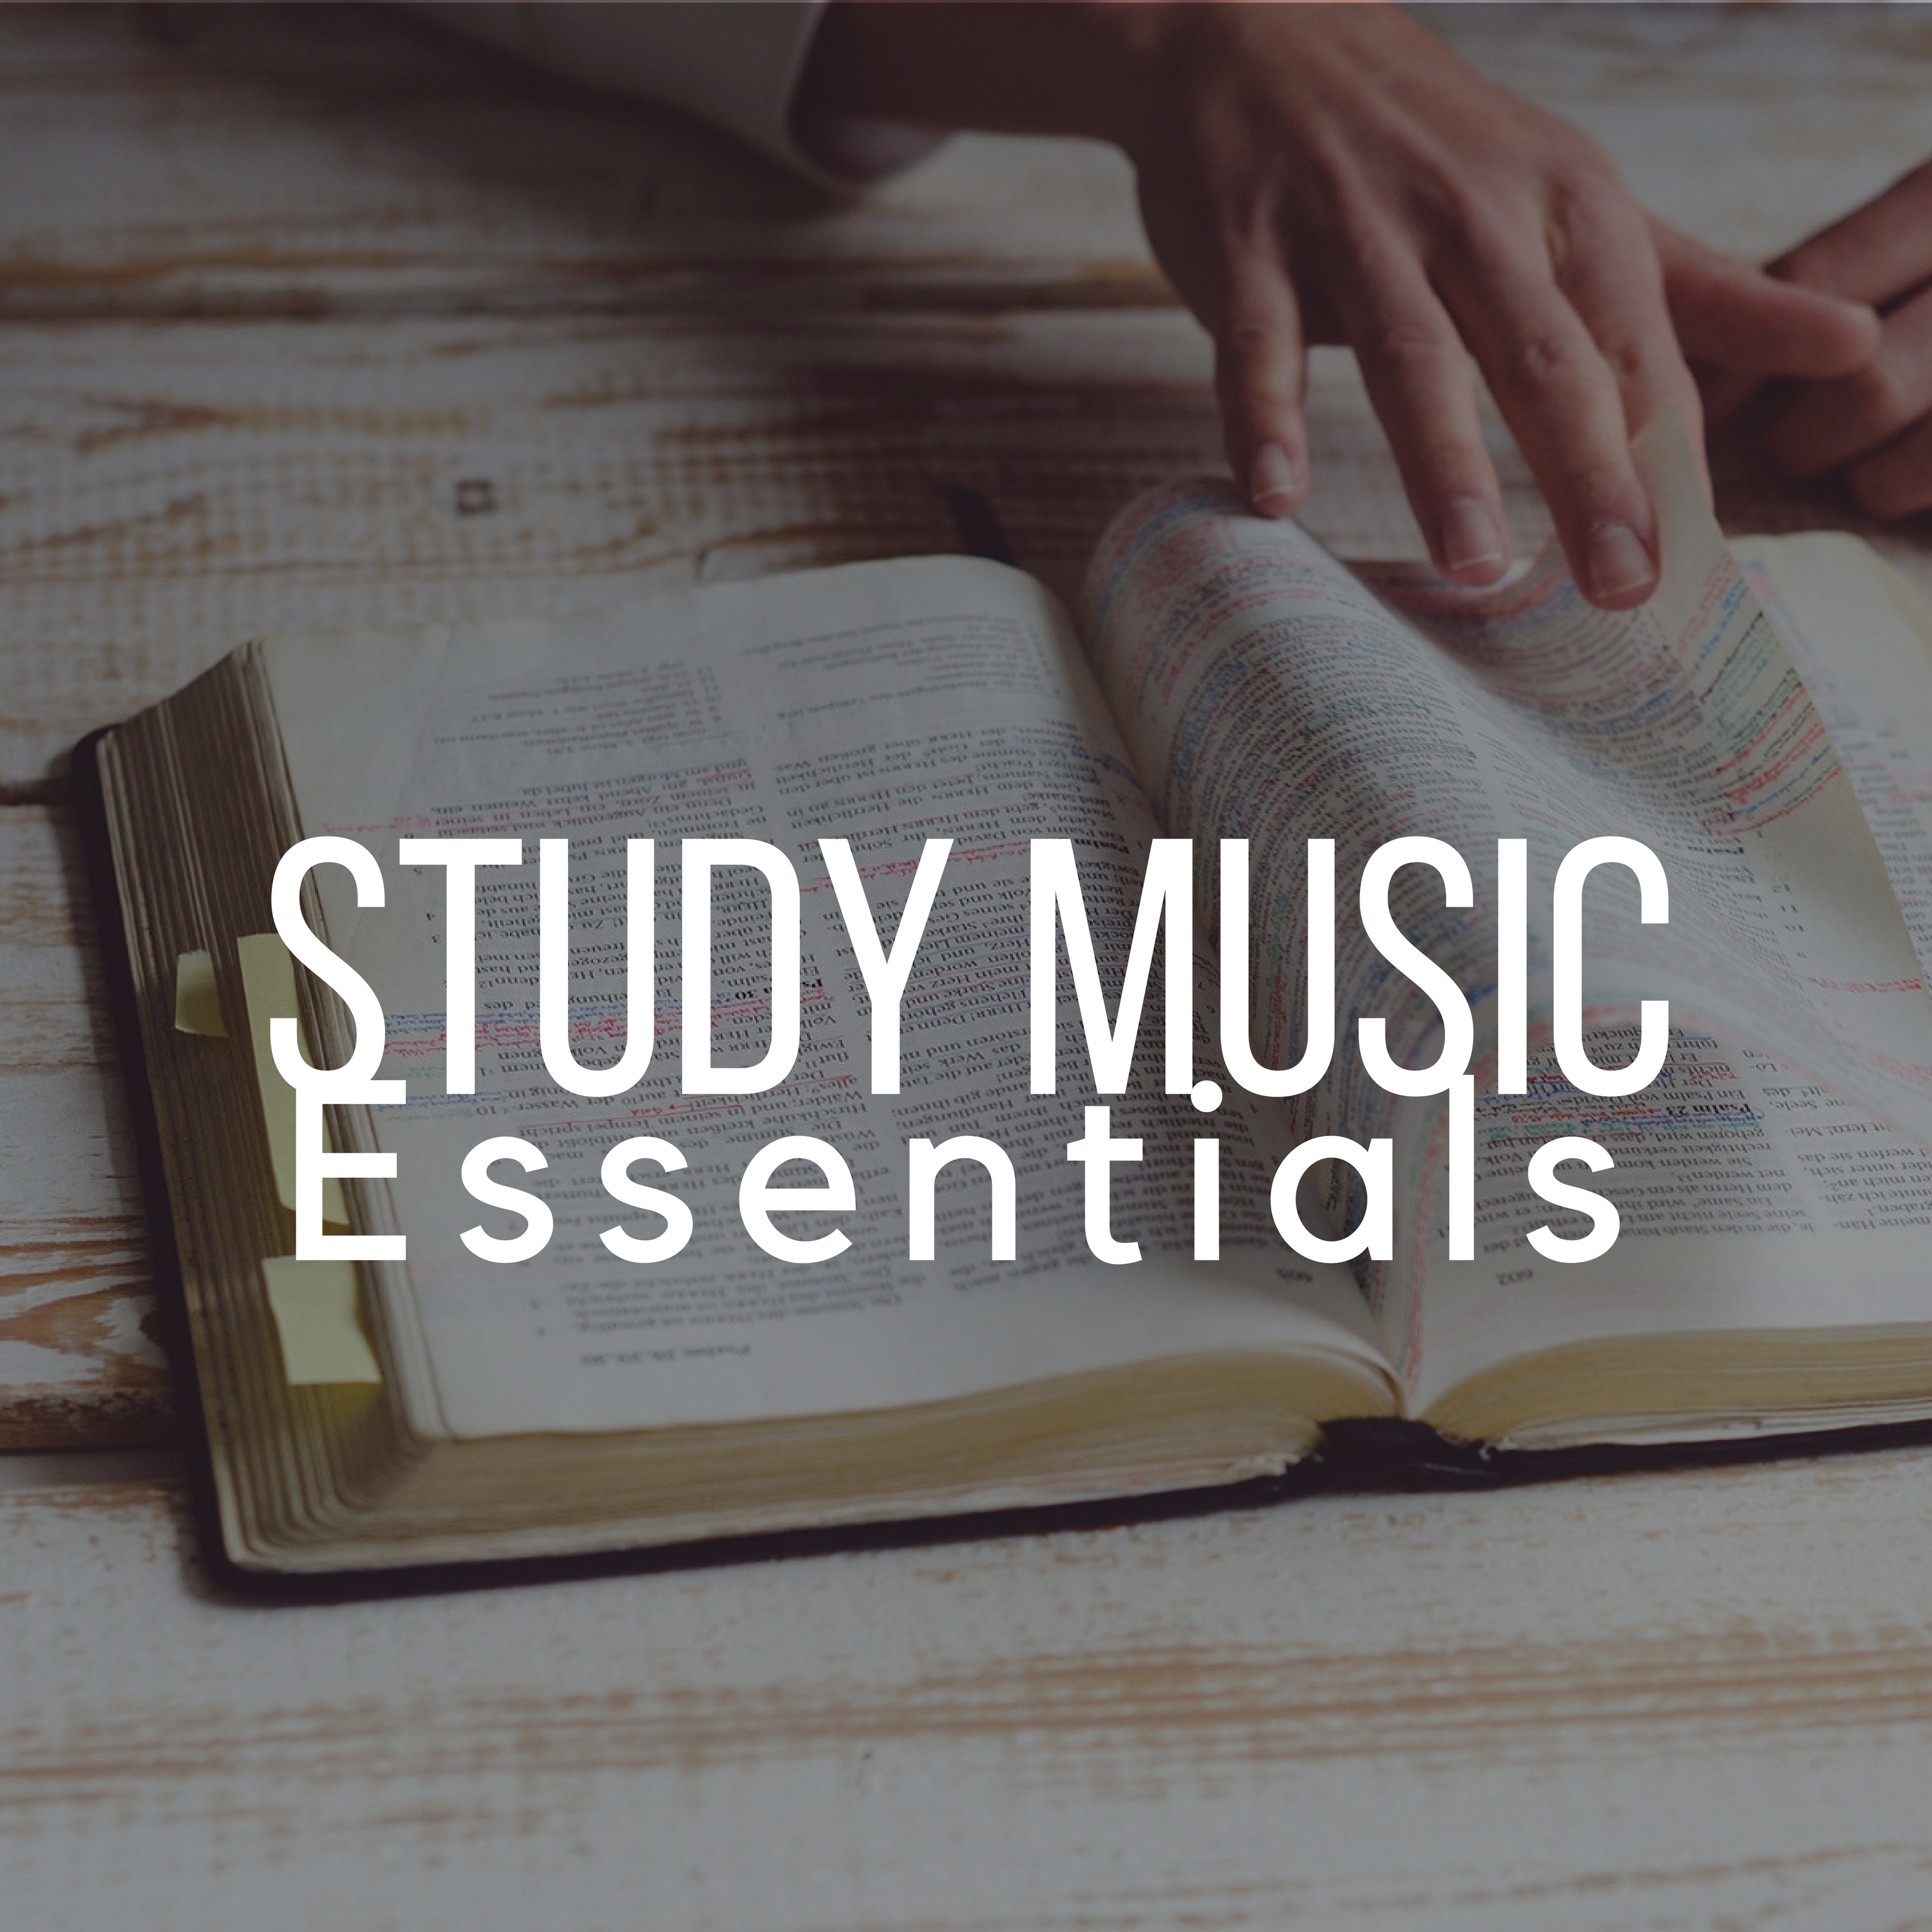 Study Music Essentials: the Best Relaxing Music for Concentrating and Studying for Finals